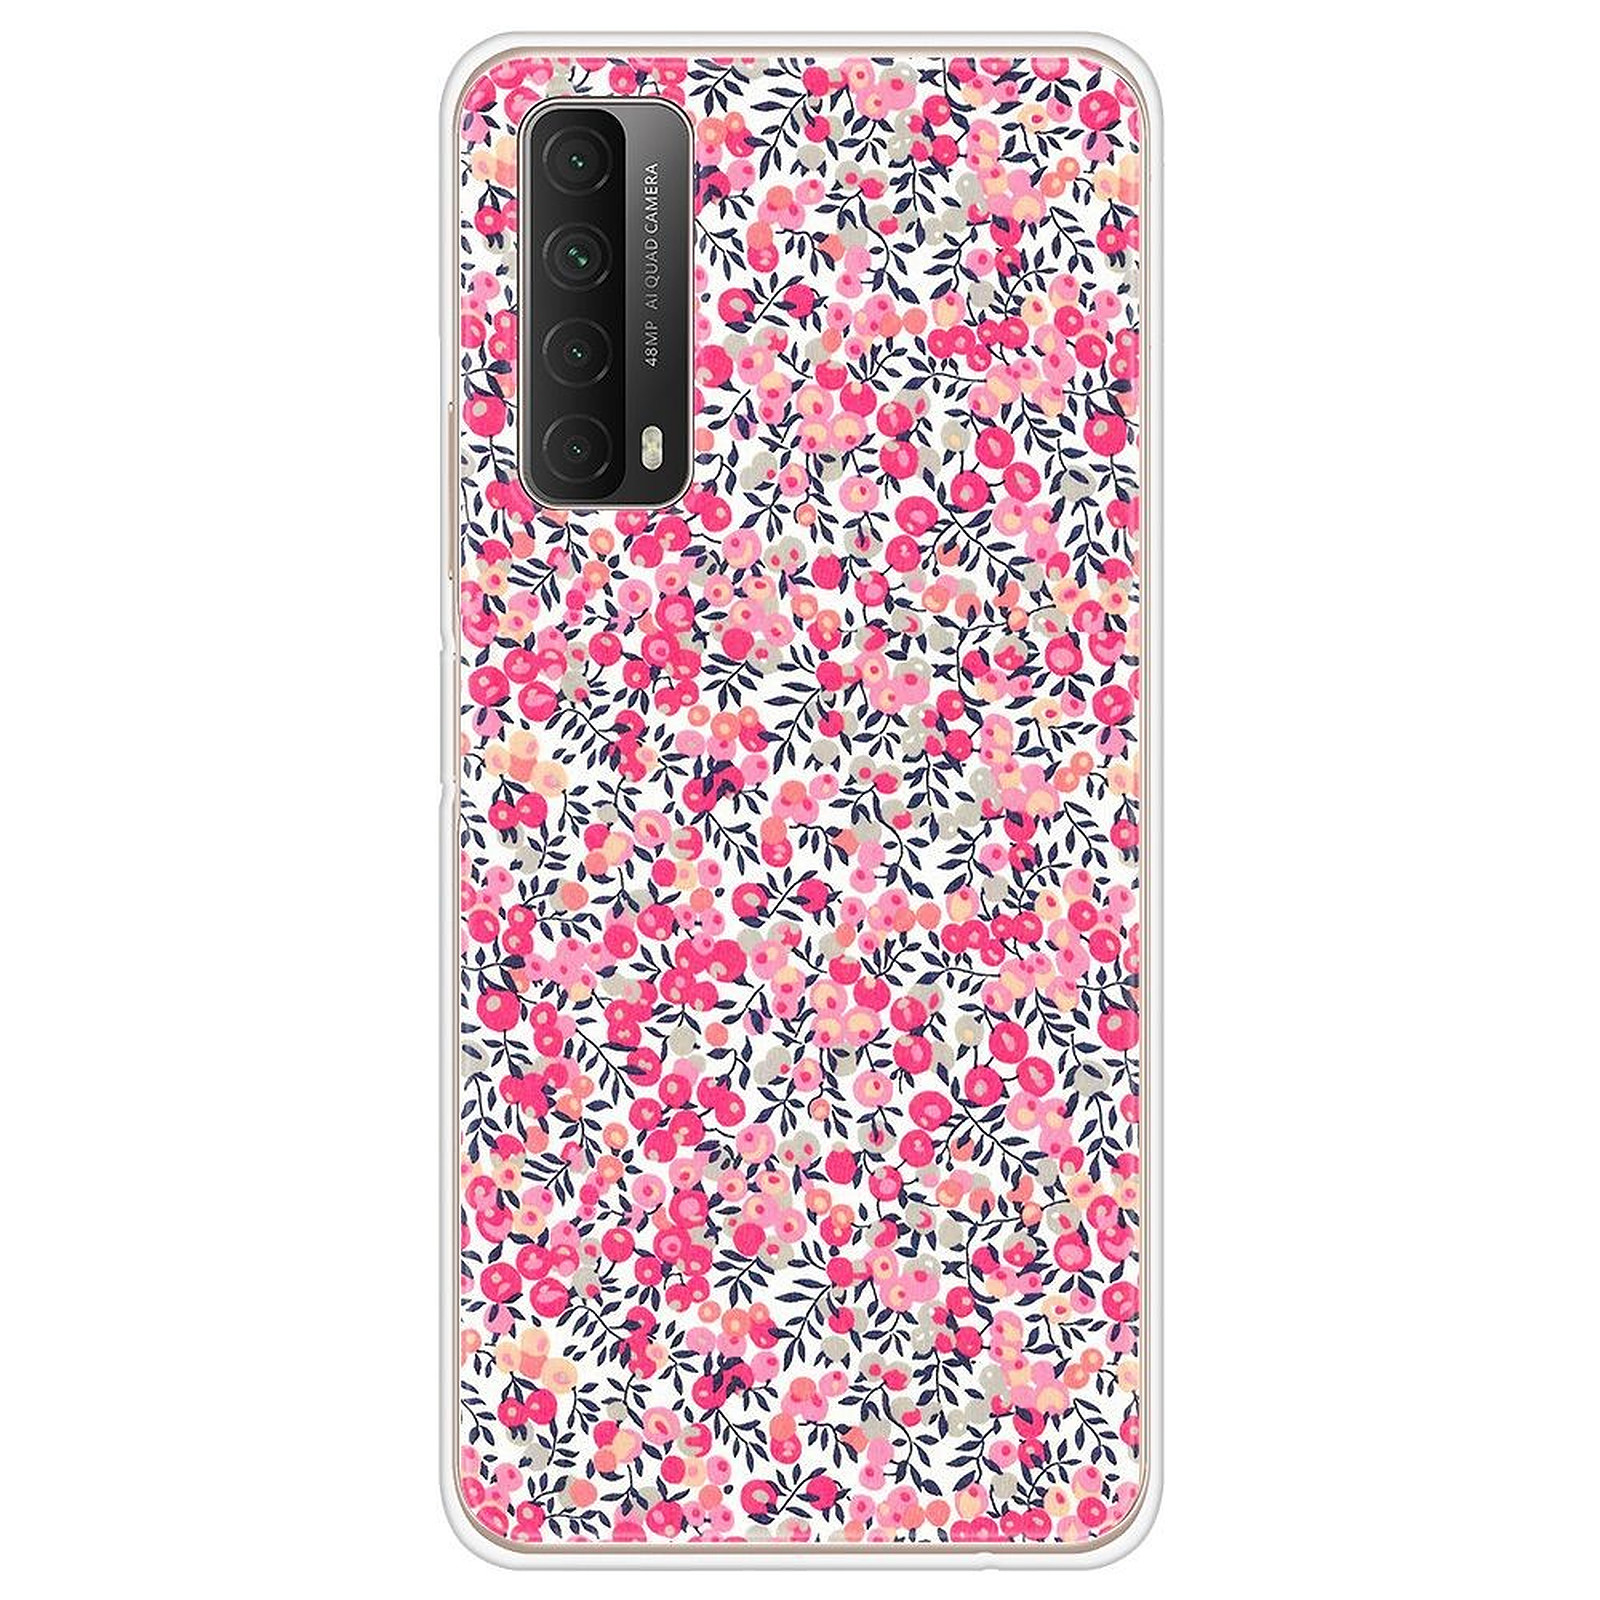 1001 Coques Coque silicone gel Huawei P Smart 2021 motif Liberty Wiltshire Rose - Coque telephone 1001Coques